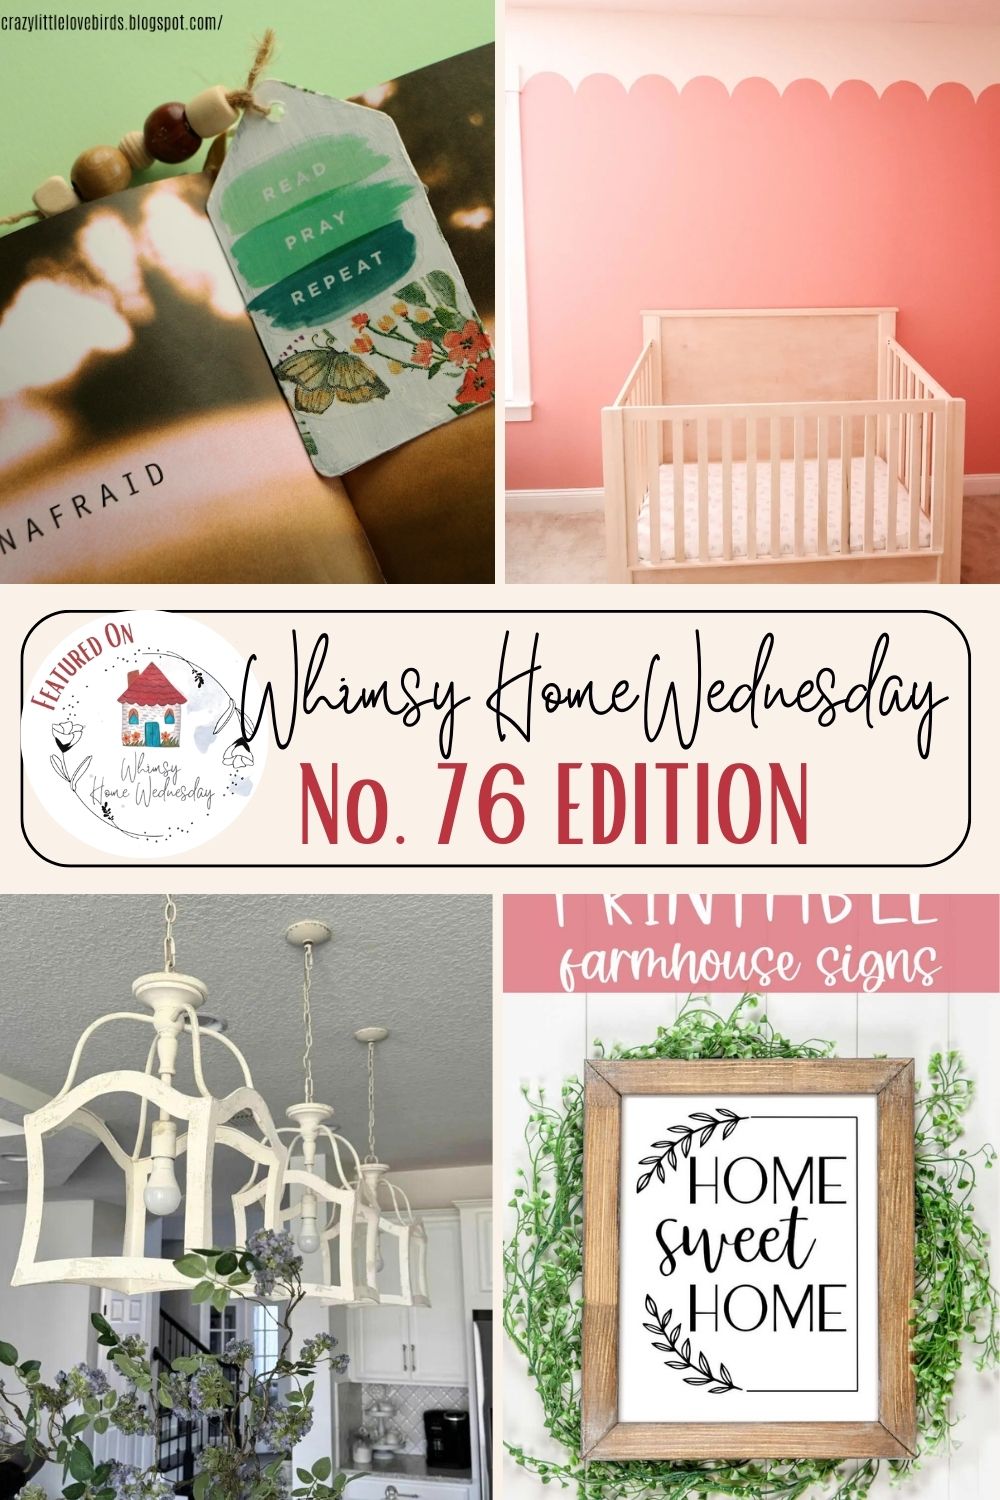 Join us on Whimsy Home Wednesday Blog Link Party No. 76 and see host projects, the features from the previous week and link up your posts!